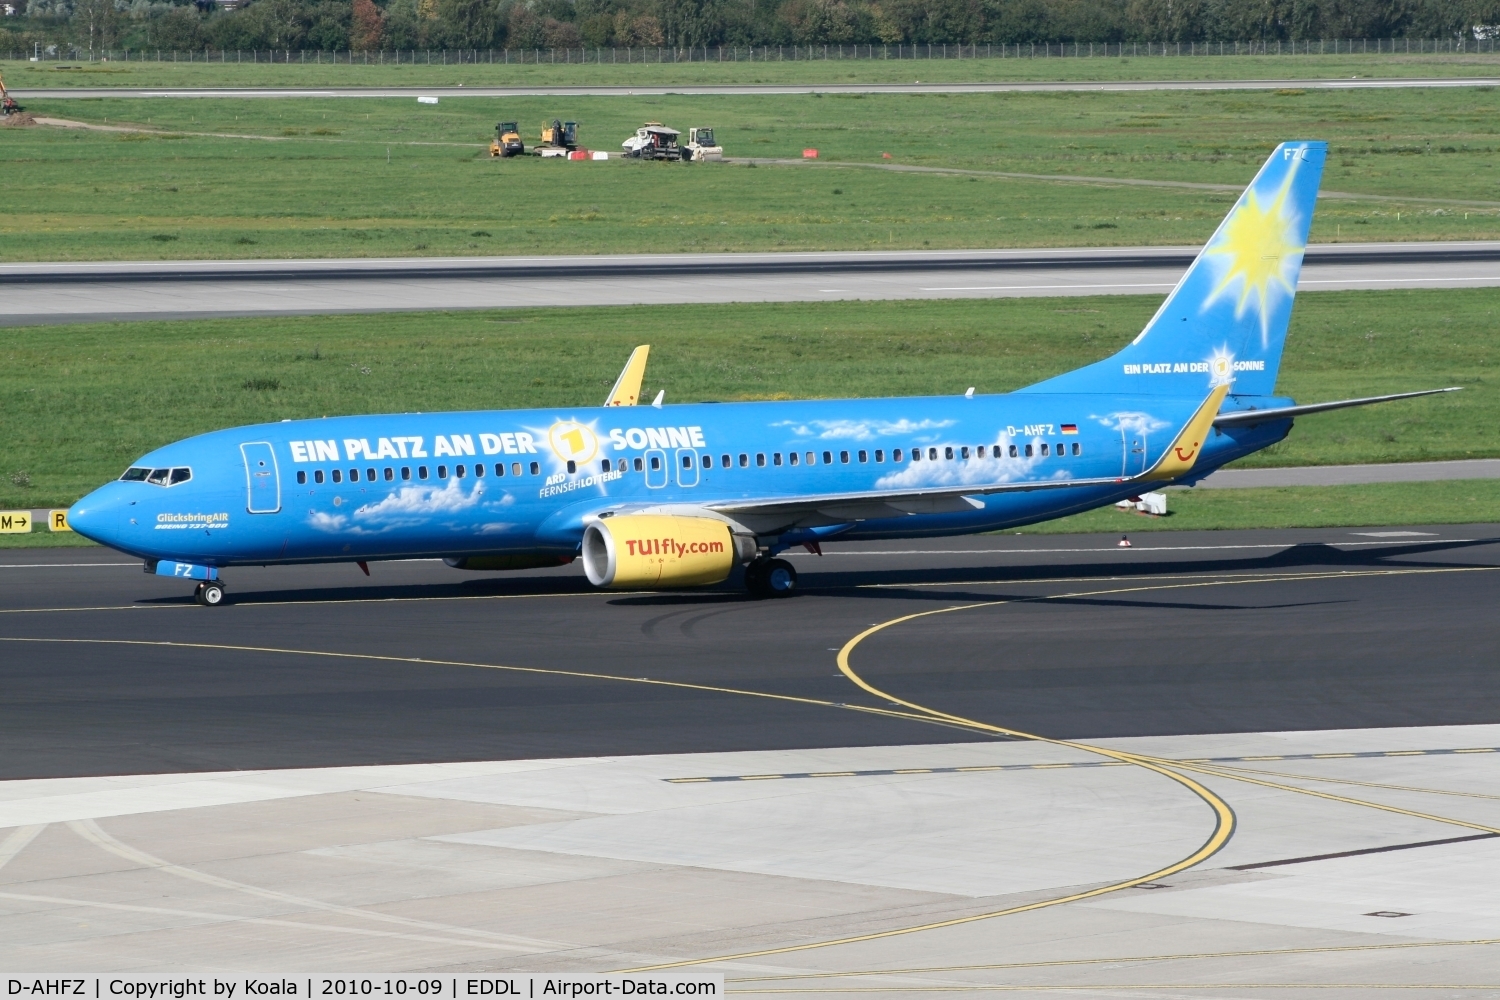 D-AHFZ, 2001 Boeing 737-8K5 C/N 30883, With advertisment for the state run lottery